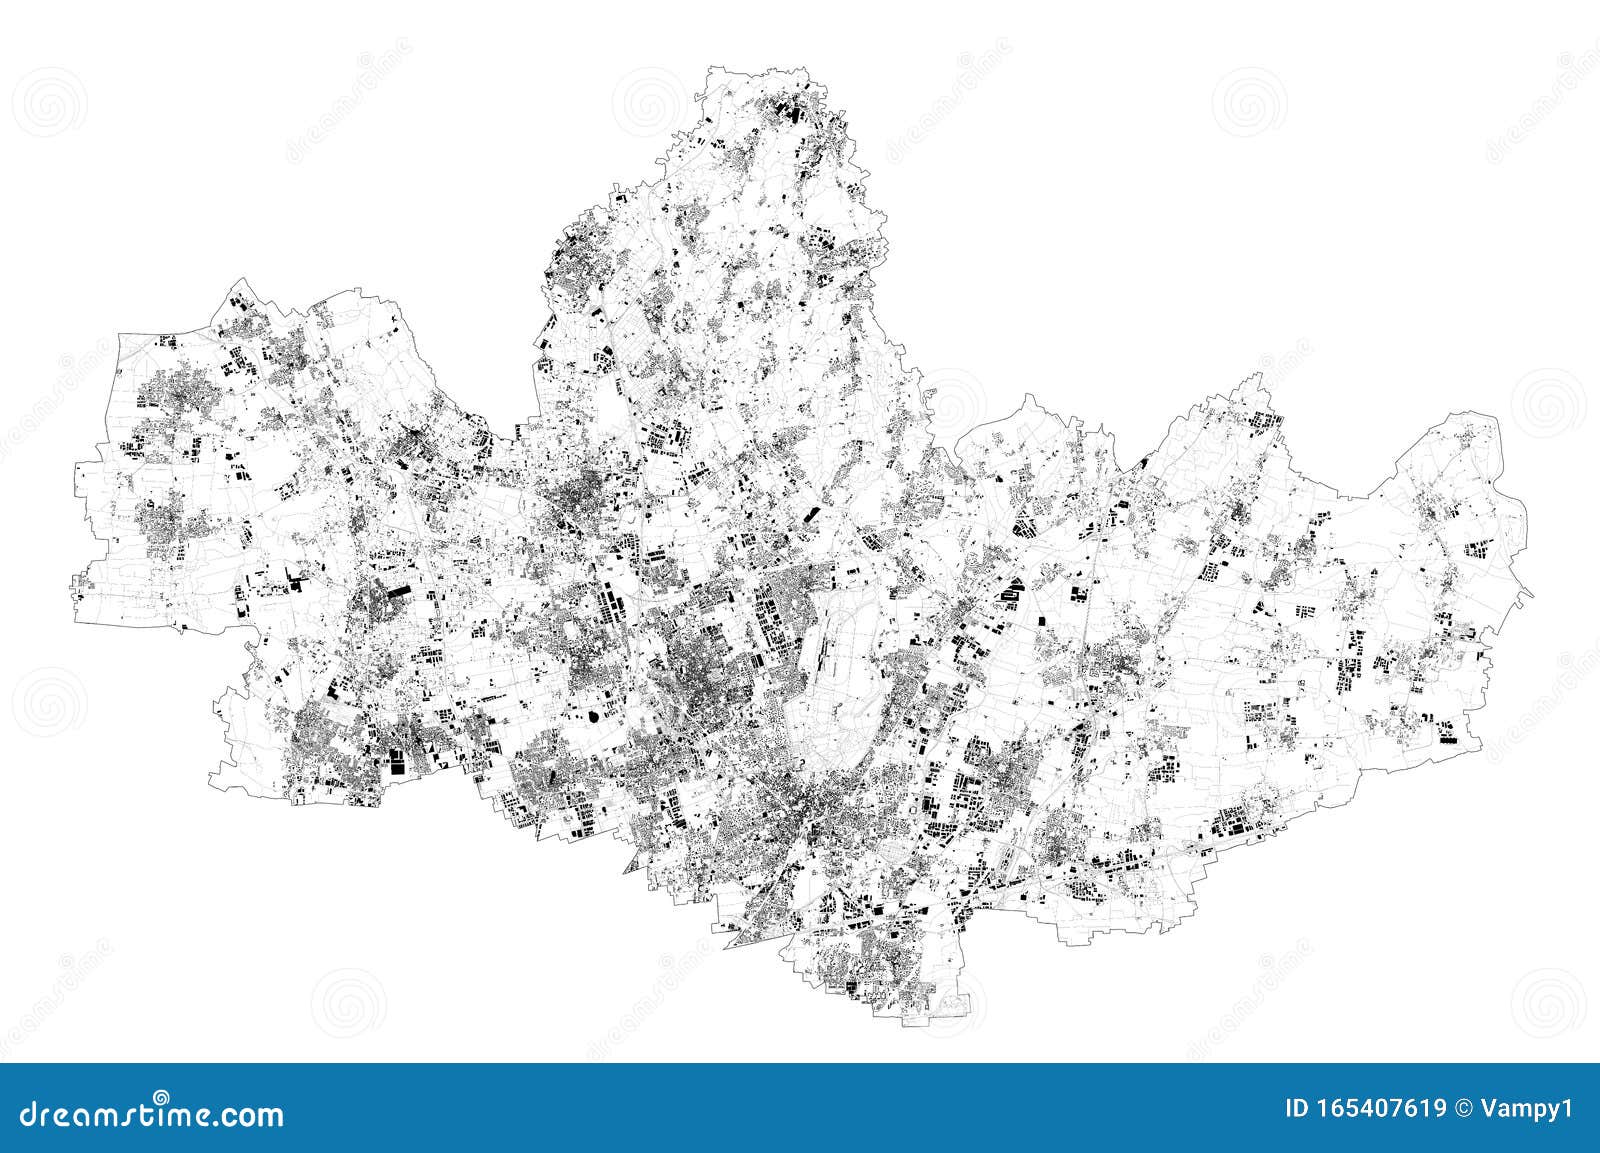 satellite map of province of monza e brianza milan, towns and roads, buildings and connecting roads of surrounding areas. italy